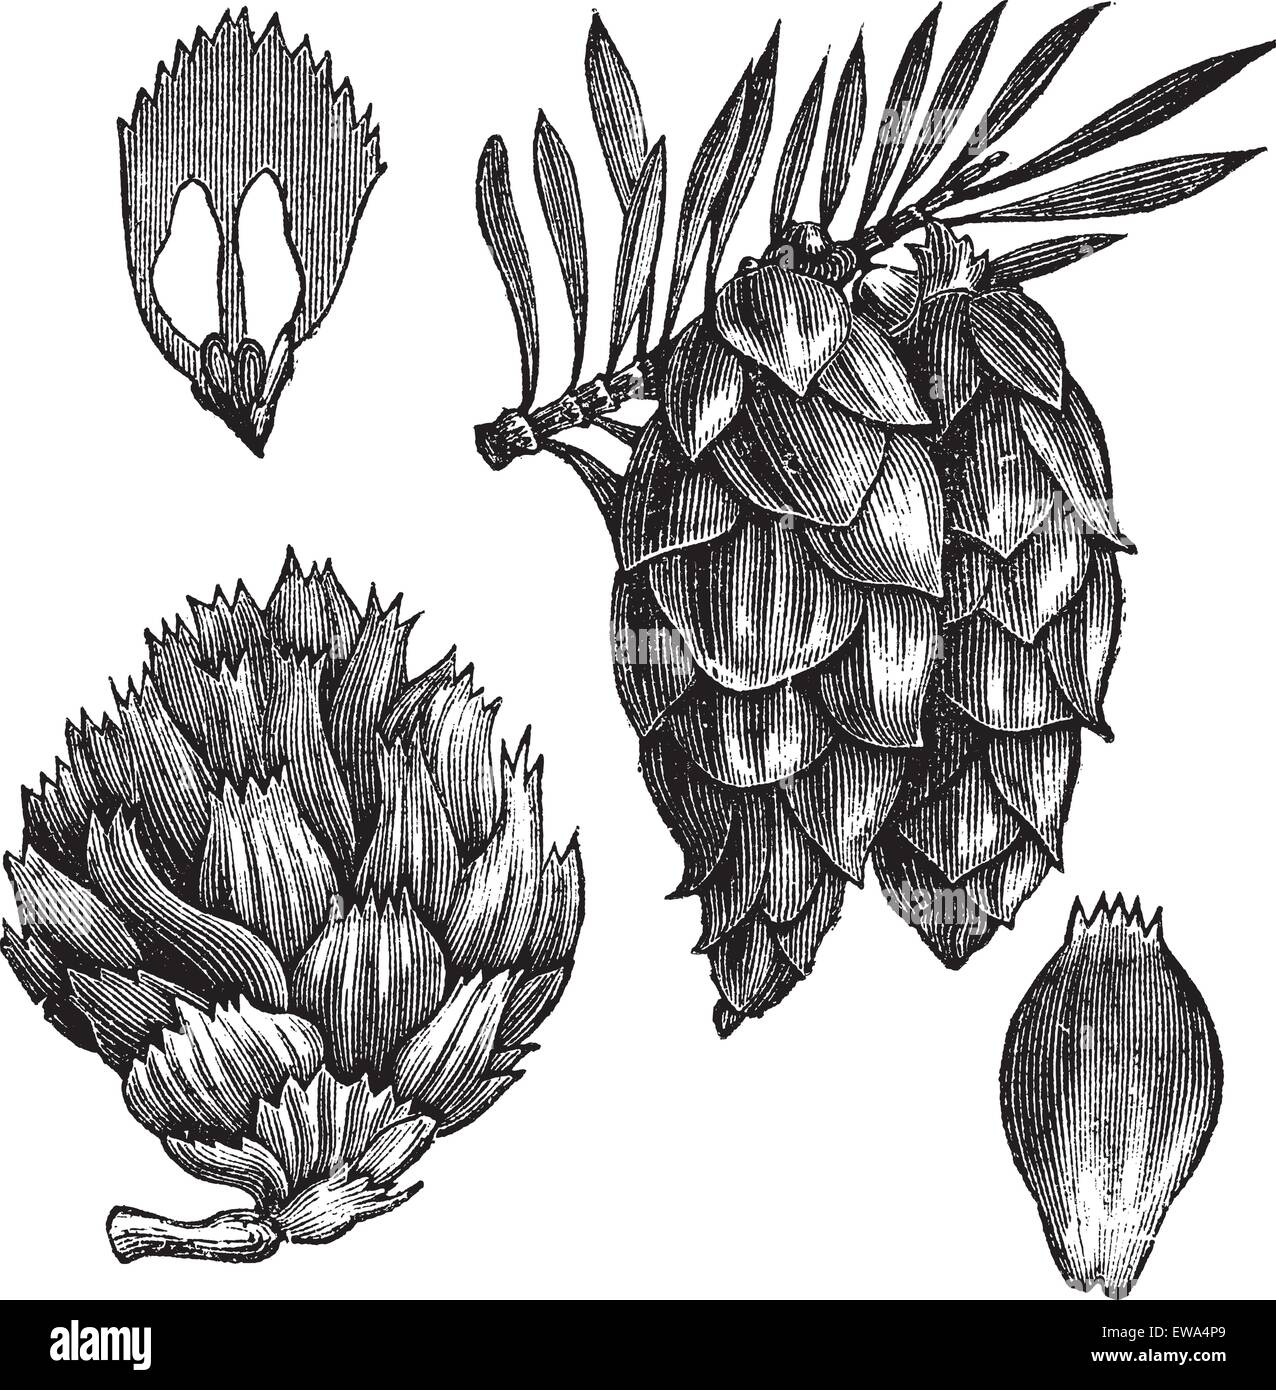 Black Spruce or Picea mariana or Abies mariana or Picea brevifolia or Picea nigra, vintage engraving. Old engraved illustration Stock Vector